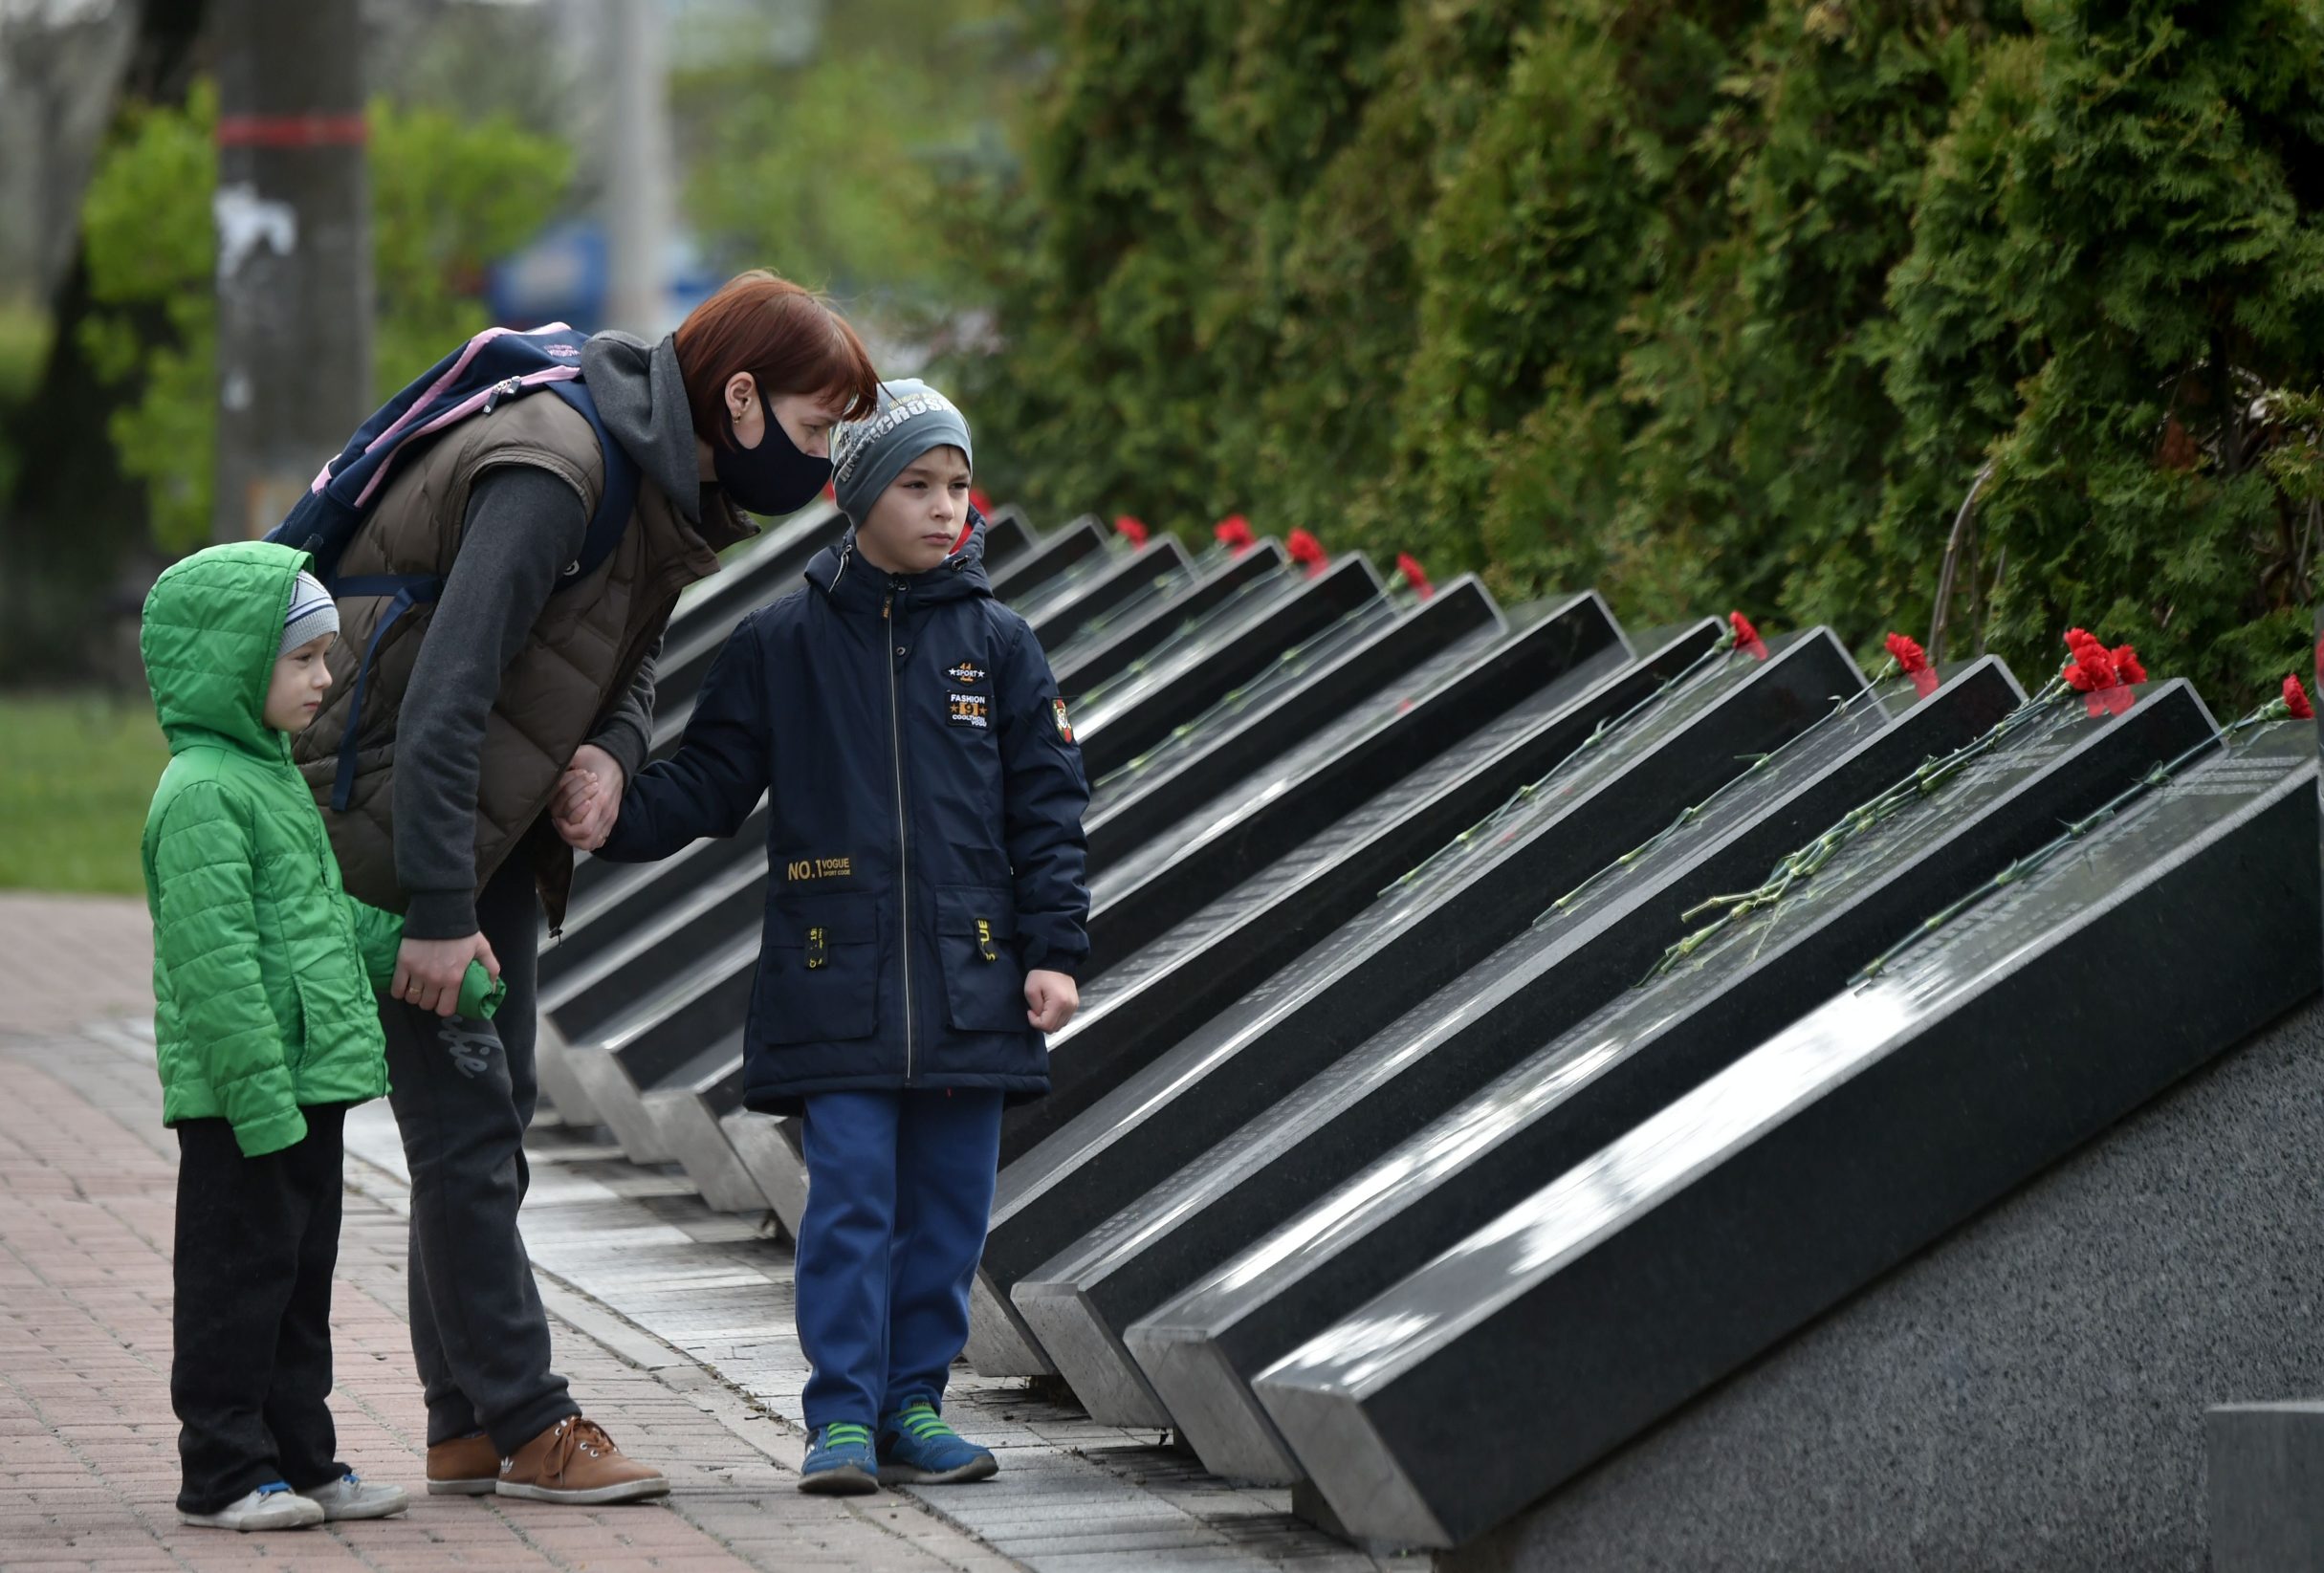 A woman wearing a face mask and her children visit Chernobyl's memorial in Kiev to commemorate the victims on the 34th anniversary of the tragedy on April 26, 2020, amid the COVID-19 coronavirus pandemic. - Ukraine on April 26, 2020 marks the 34th anniversary of the Chernobyl disaster which was the world's worst nuclear accident. (Photo by Sergei SUPINSKY / AFP)